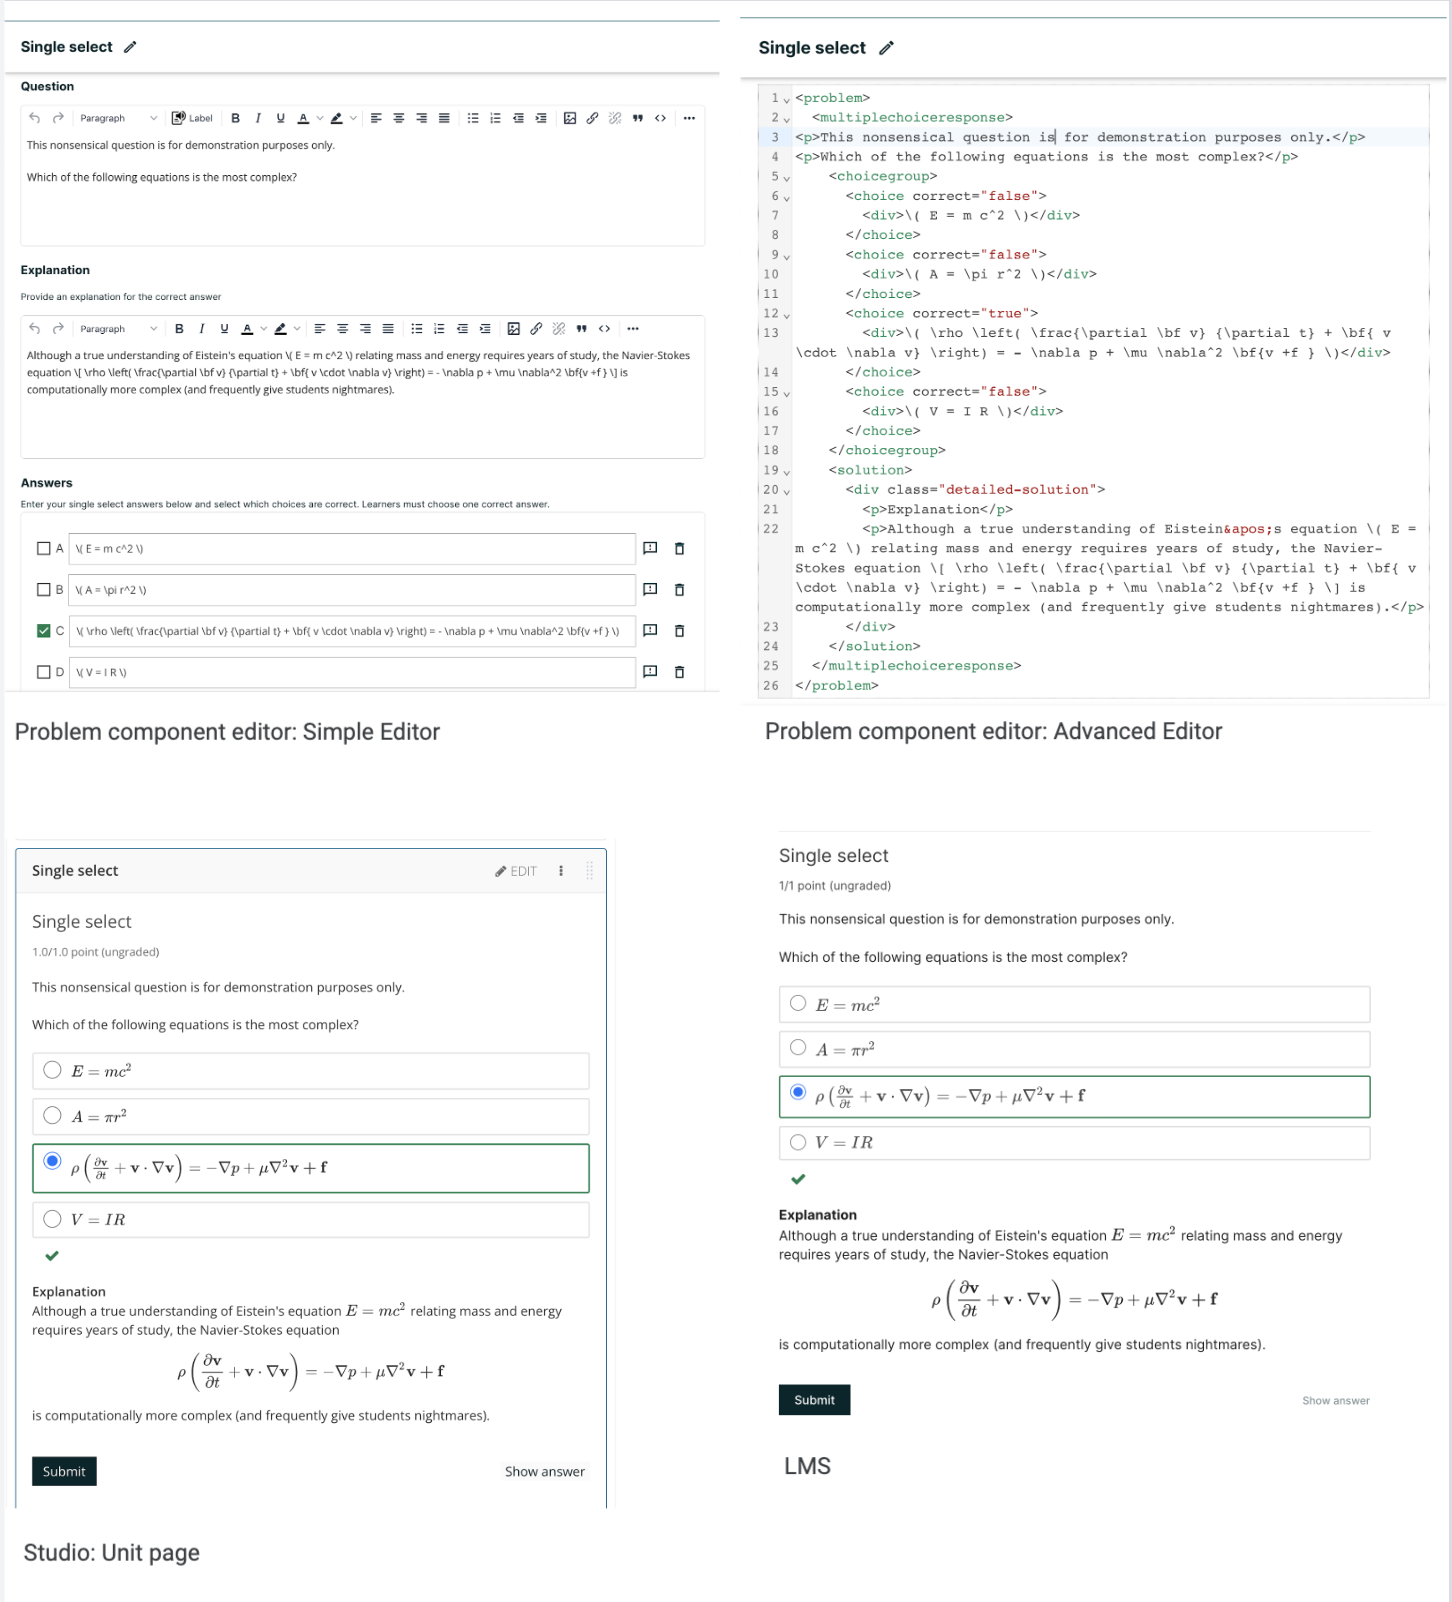 A composite image of four views of the same single select problem. The simple editor Markdown and advanced editor OLX are shown at the top, with the rendered problem on the Studio unit page and in the LMS below.